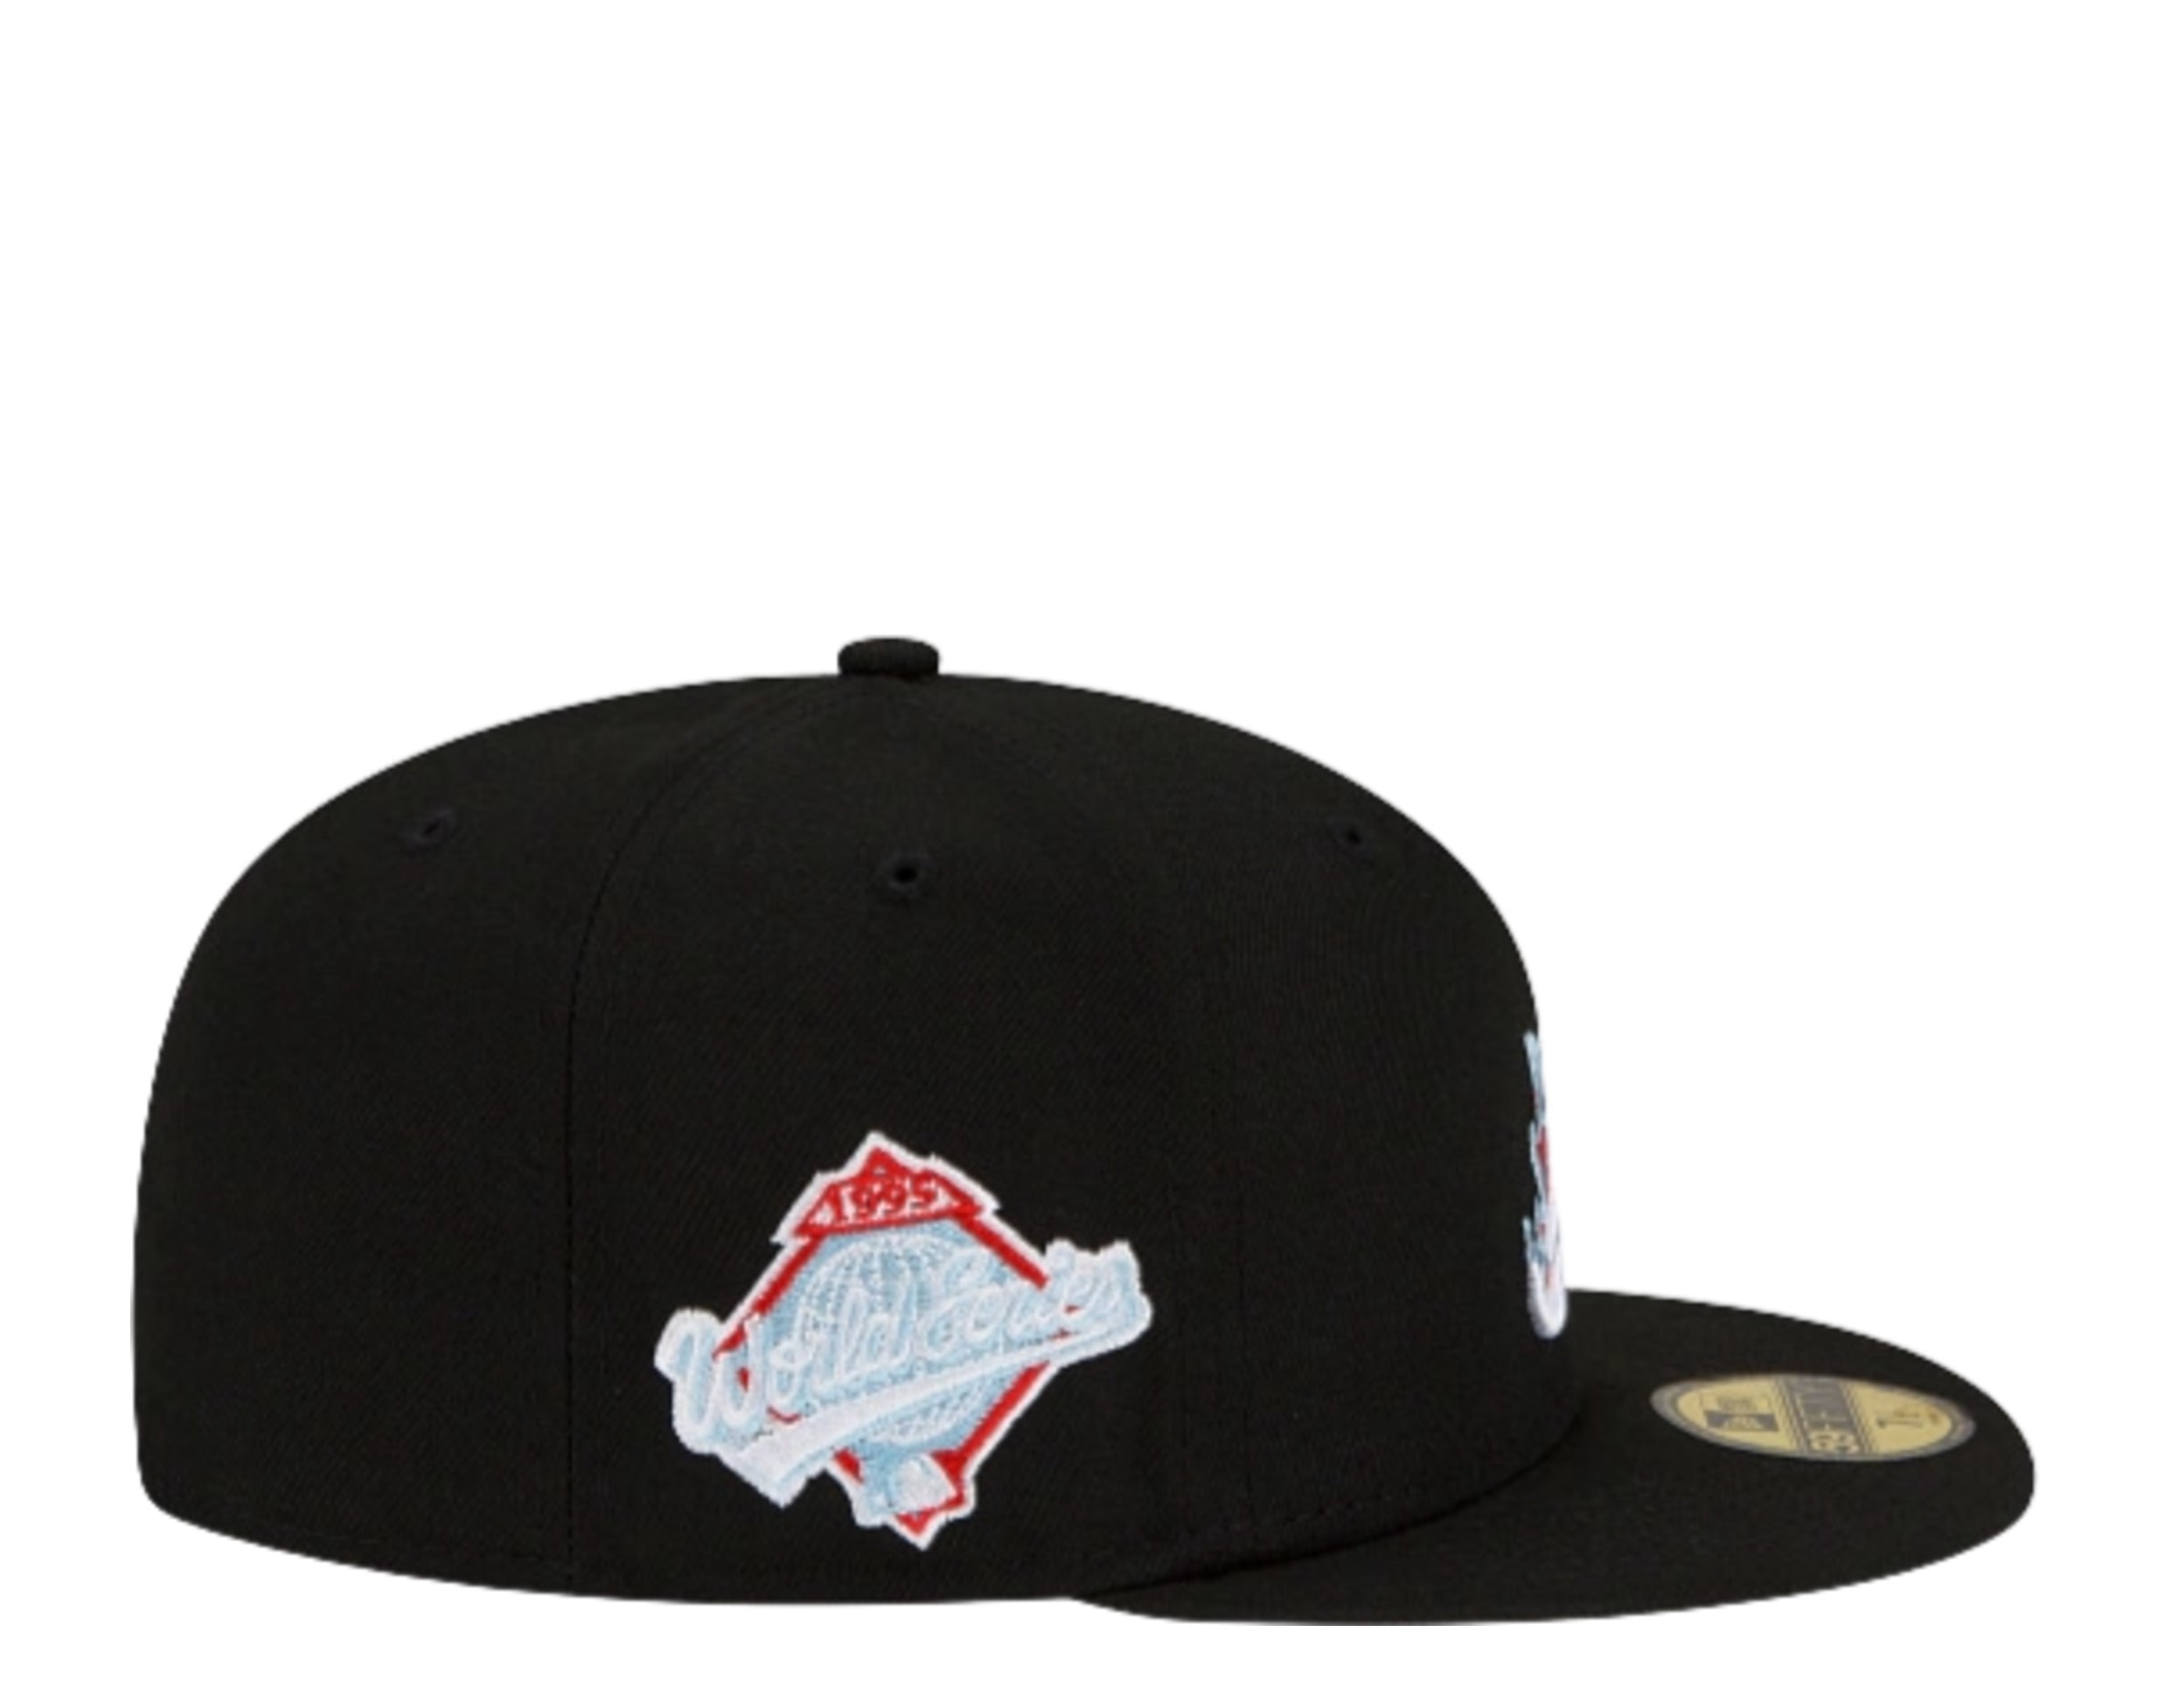 HAT CLUB on X: NOW AVAILABLE 🕚 We've got a flurry of Custom MLB World  Series patch hats! Featuring: the Blacked Out, Red Underbill 2002 Anaheim # Angels 🥰, the Black 1989 Oakland #